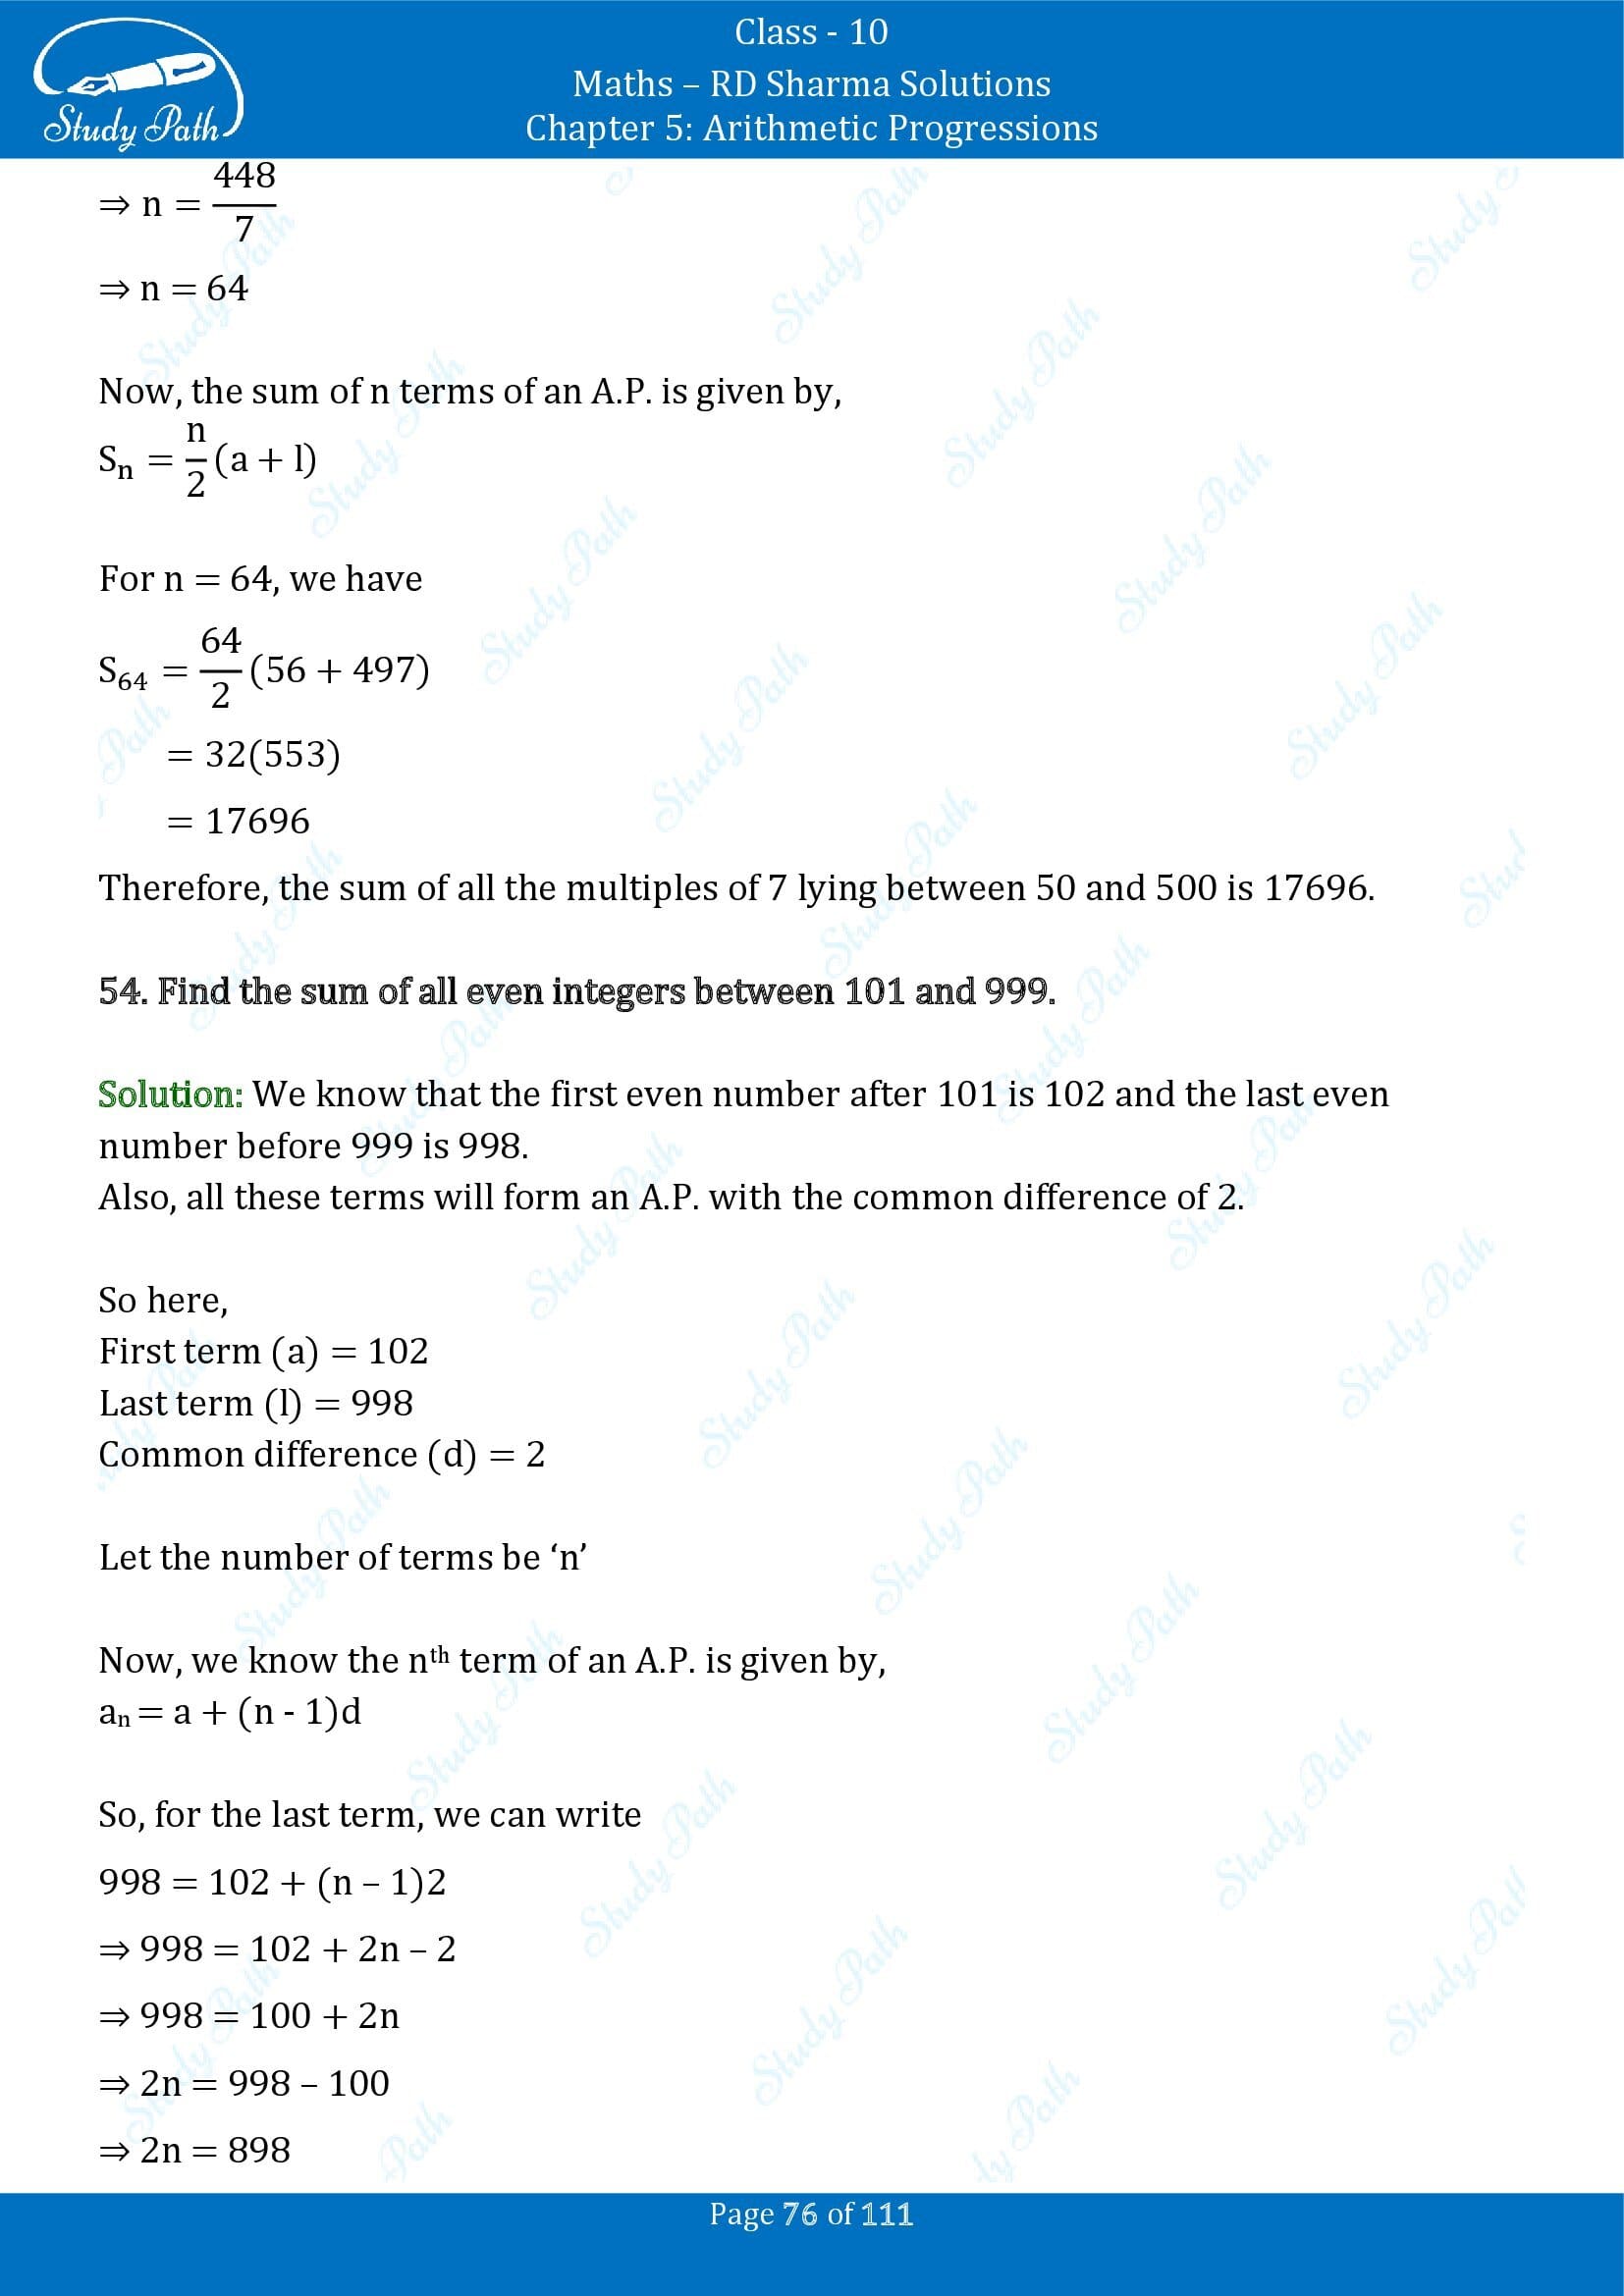 RD Sharma Solutions Class 10 Chapter 5 Arithmetic Progressions Exercise 5.6 00076